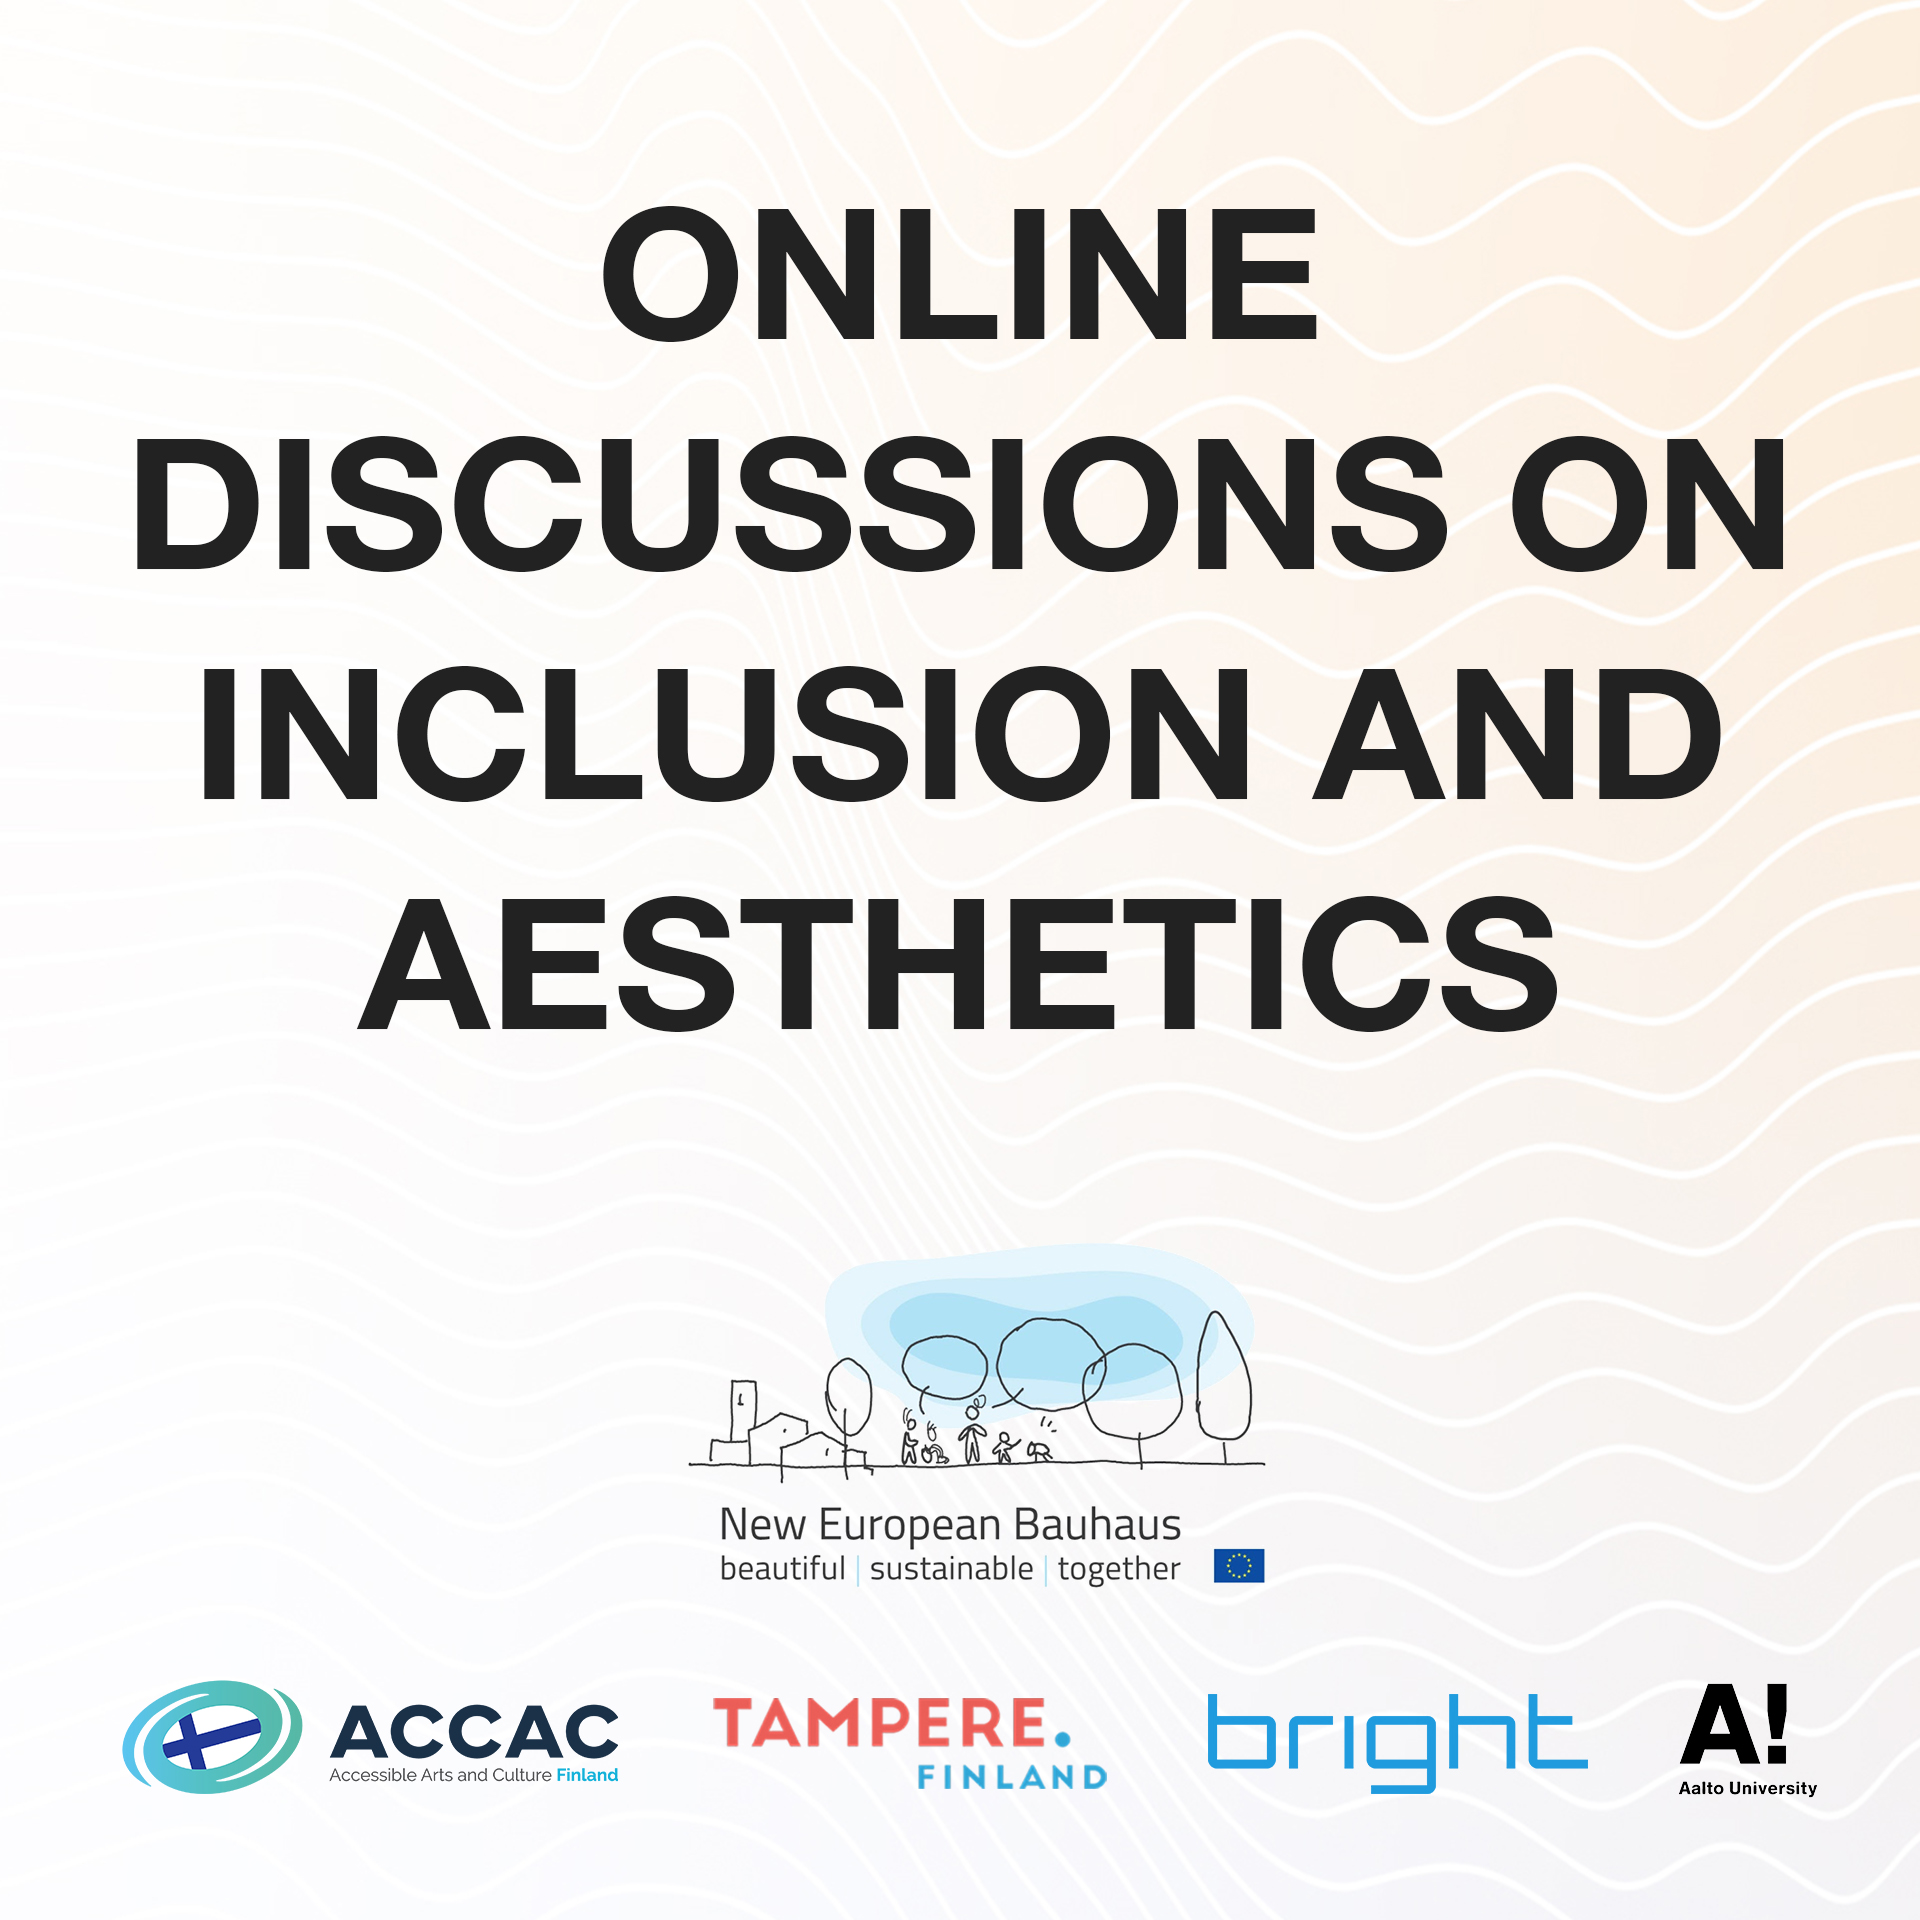 Online discussions on inclusion and aesthetics organised by Accessible Arts and Culture (ACCAC) Finland a New European Bauhaus partner. Co-organised with the city of Tampere, Bright Finland and Aalto University.